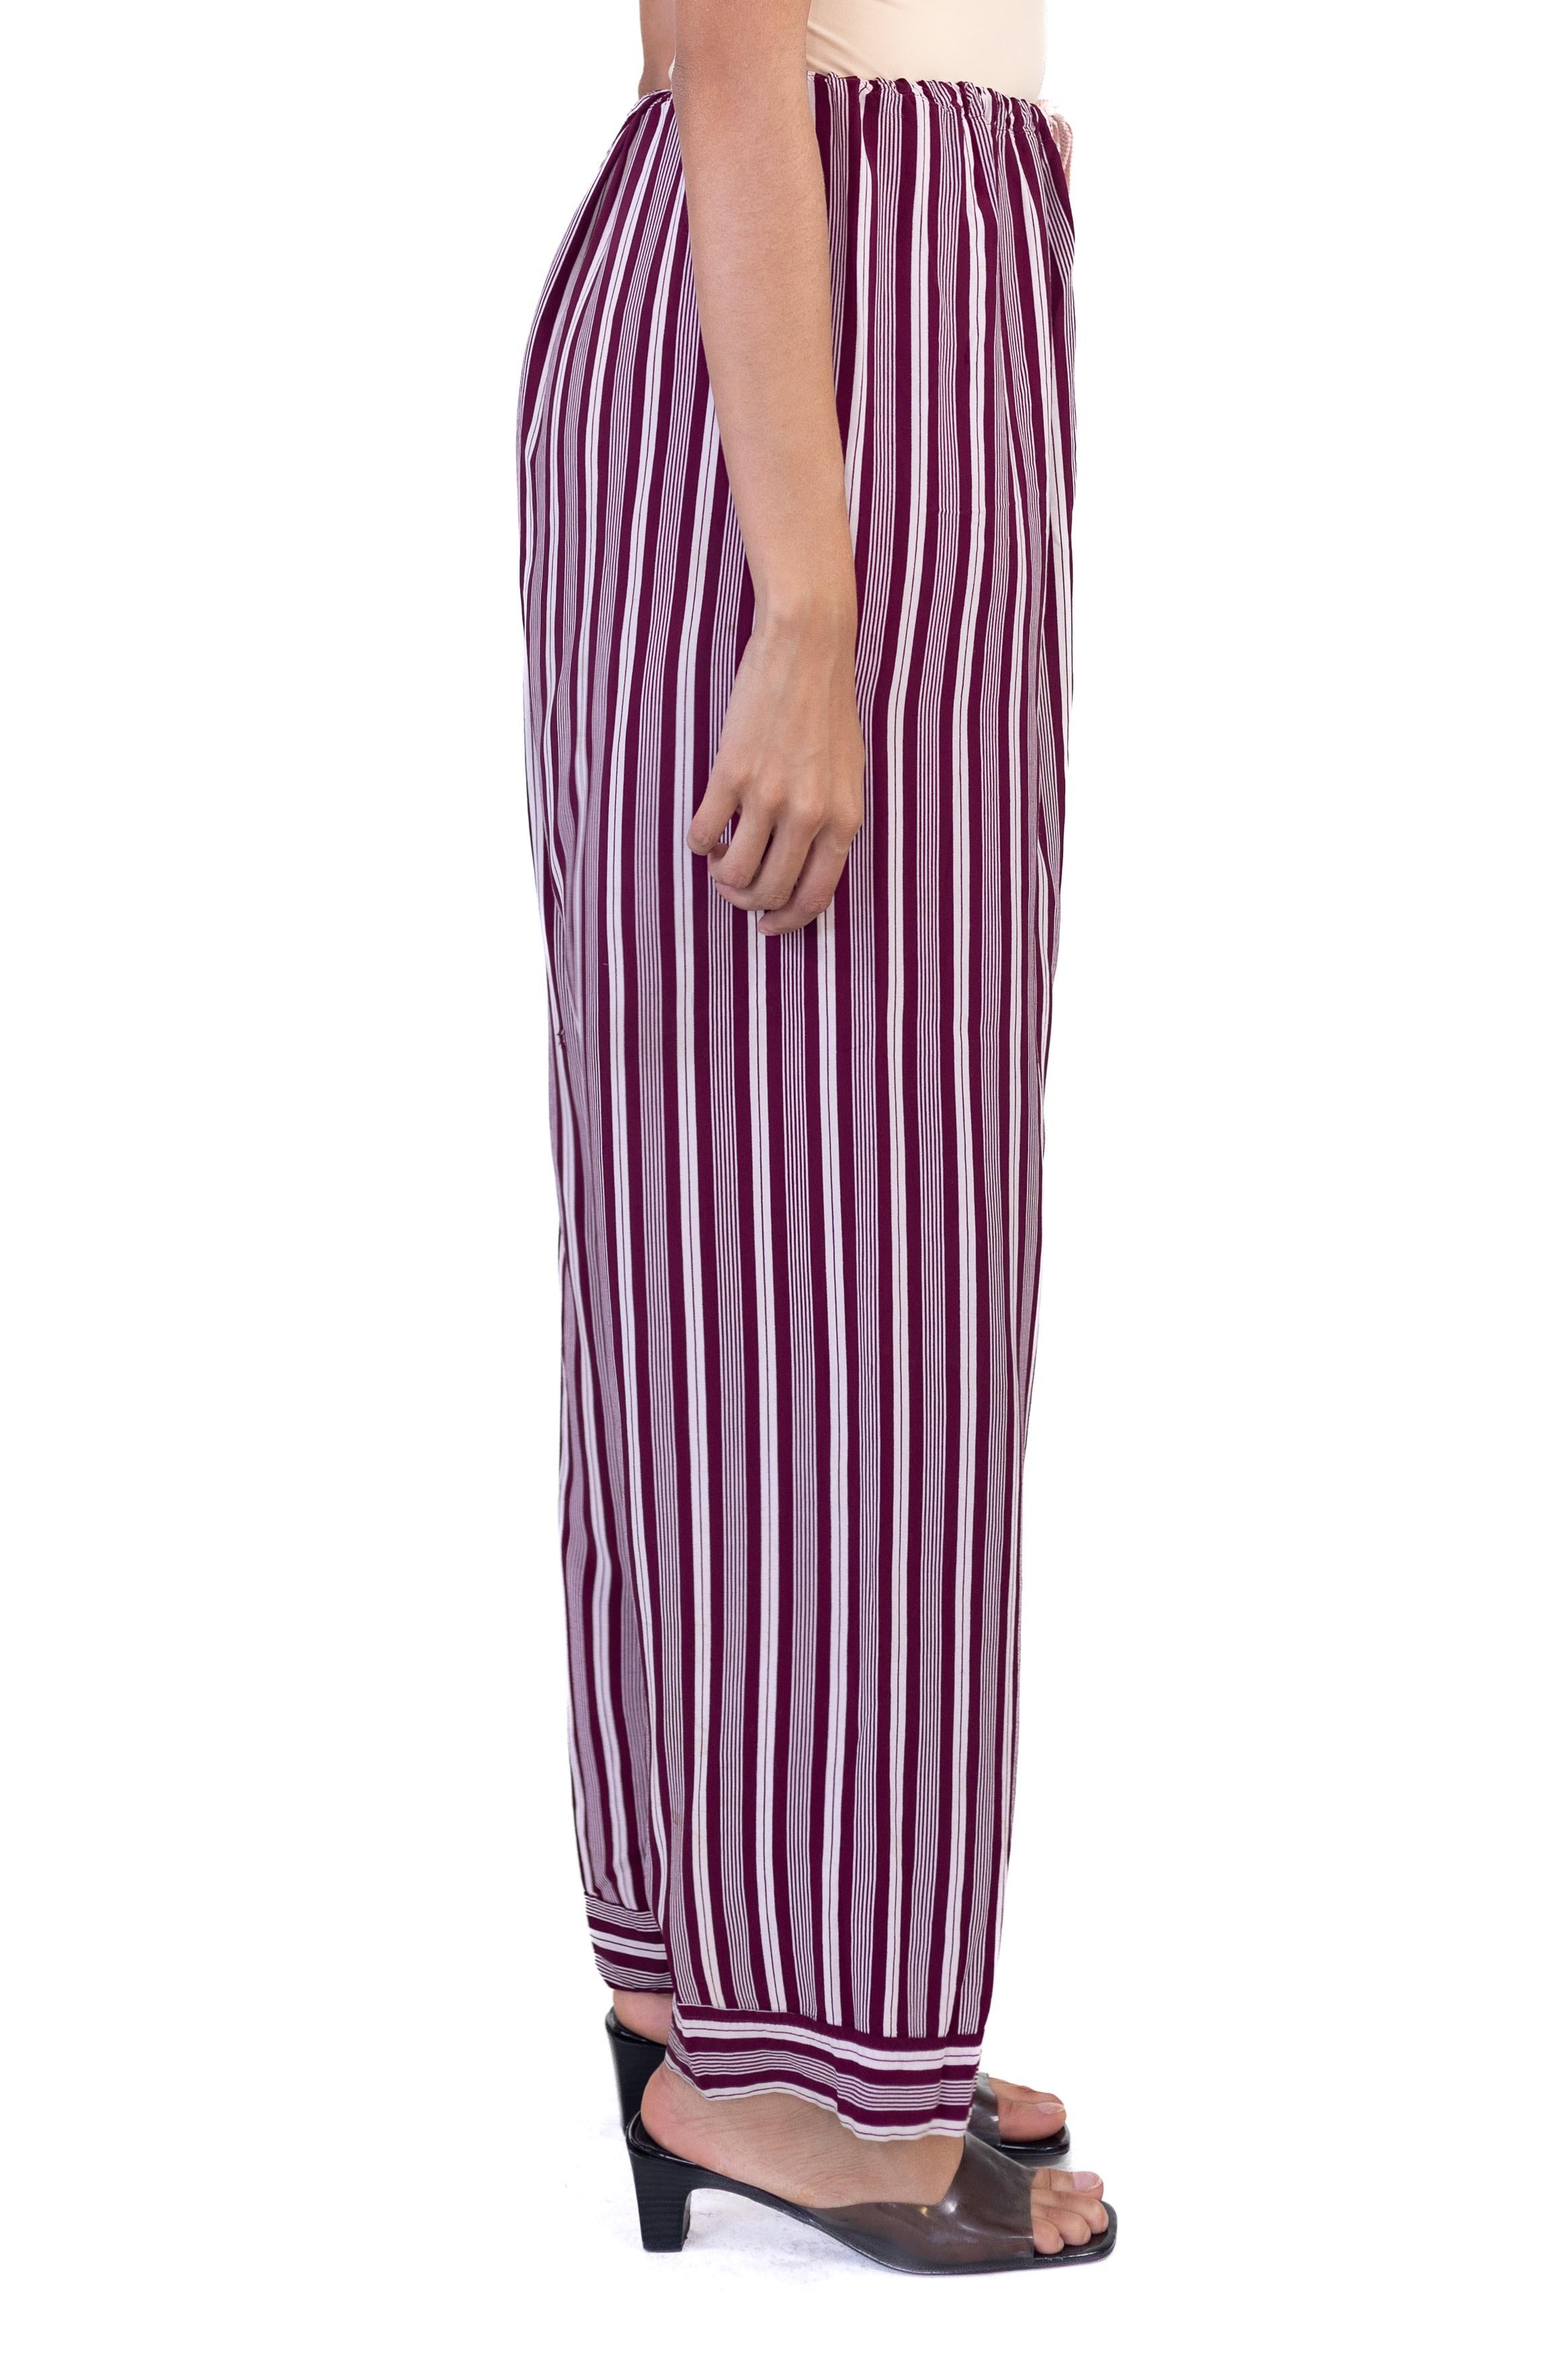 1940S Burgundy Striped Rayon Pajama Pants In Excellent Condition For Sale In New York, NY